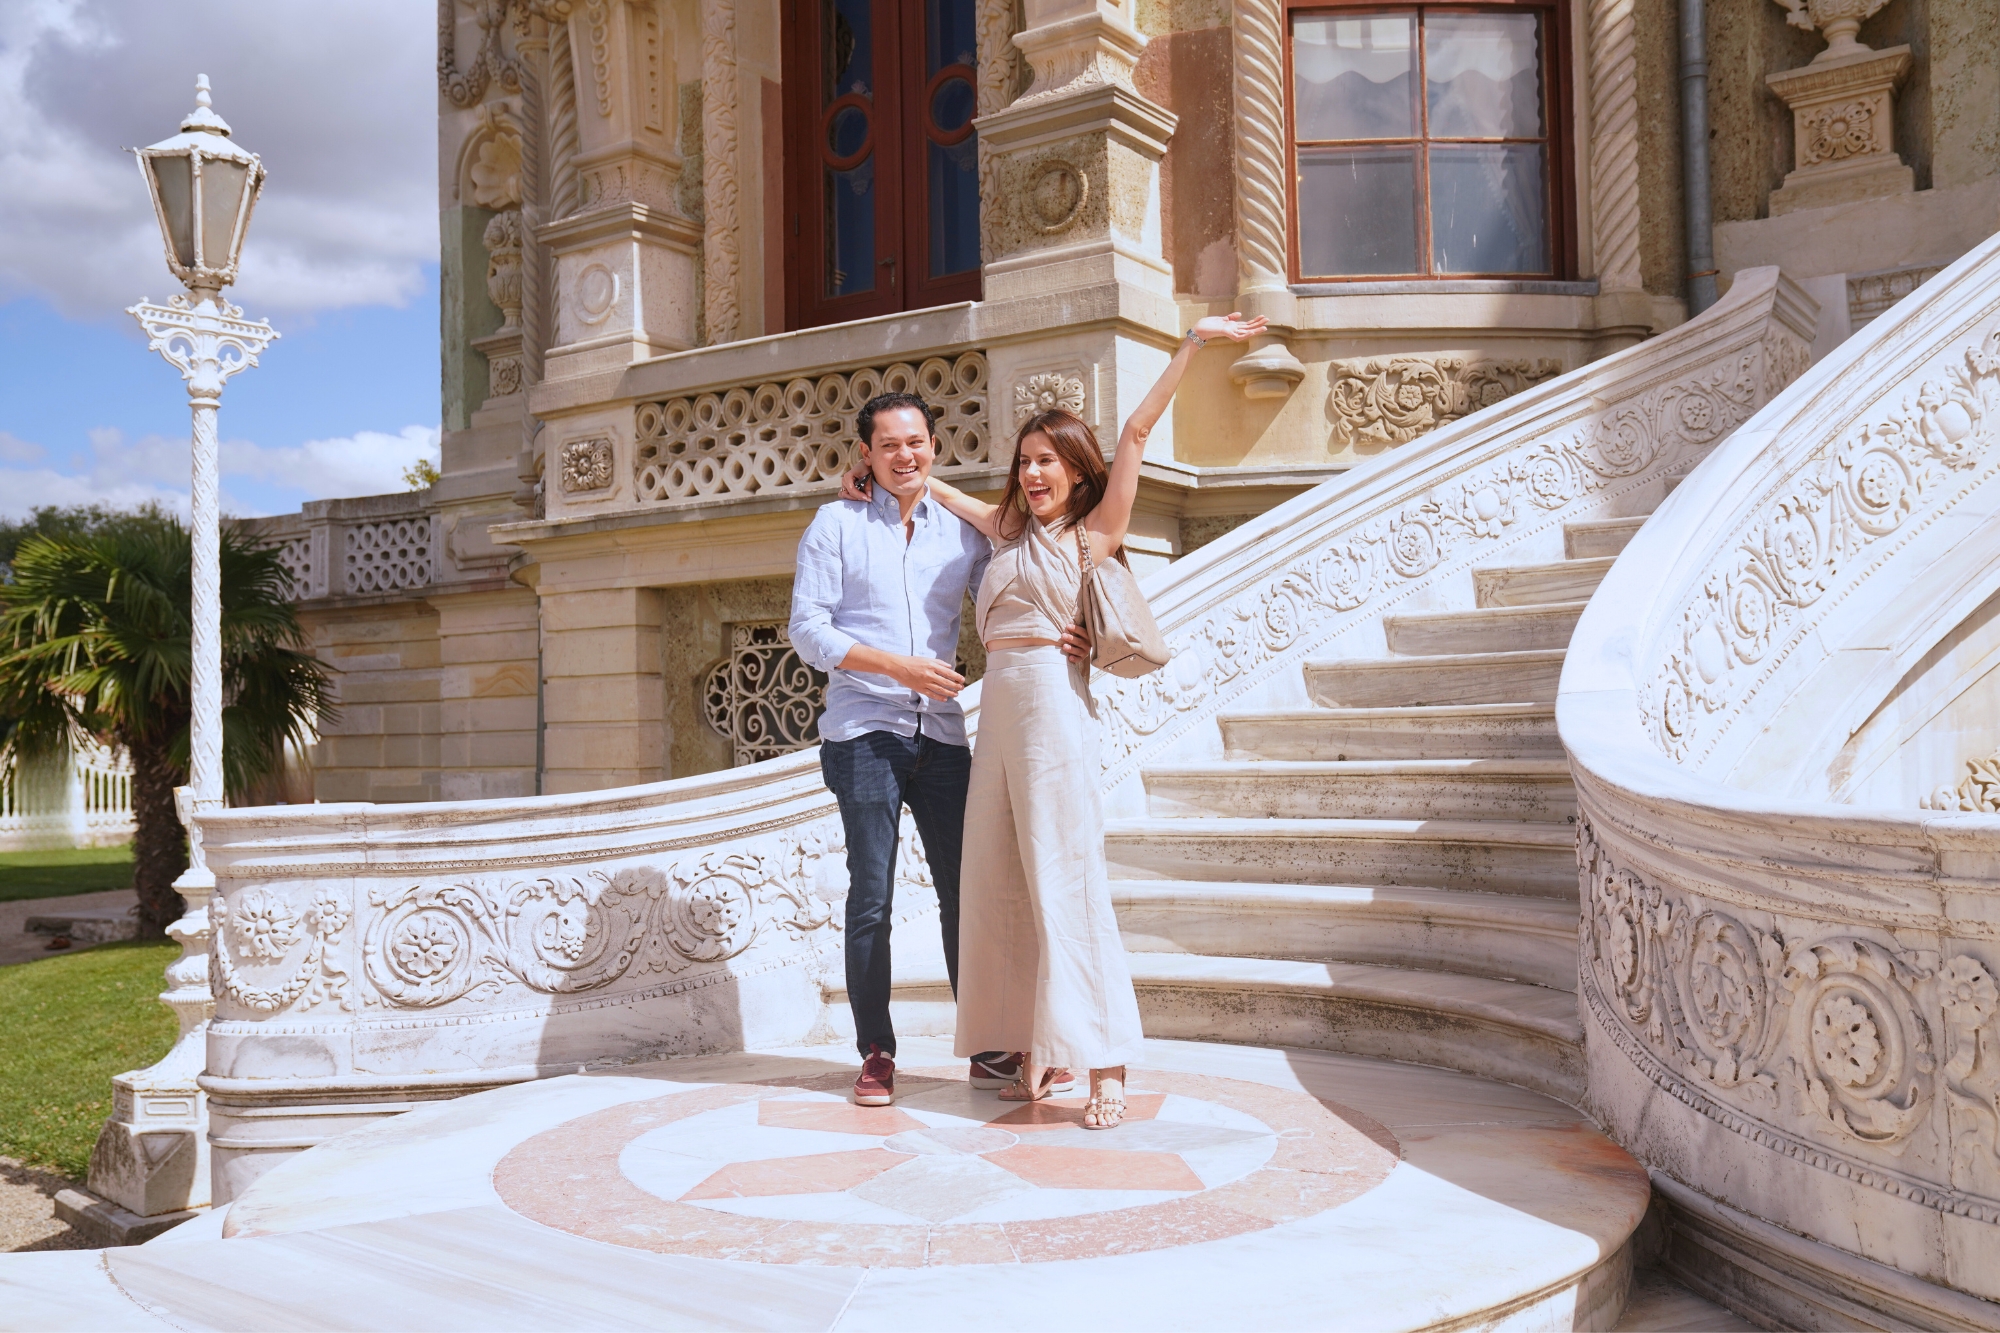 Proposal photoshoot by Nese, Localgrapher in Istanbul